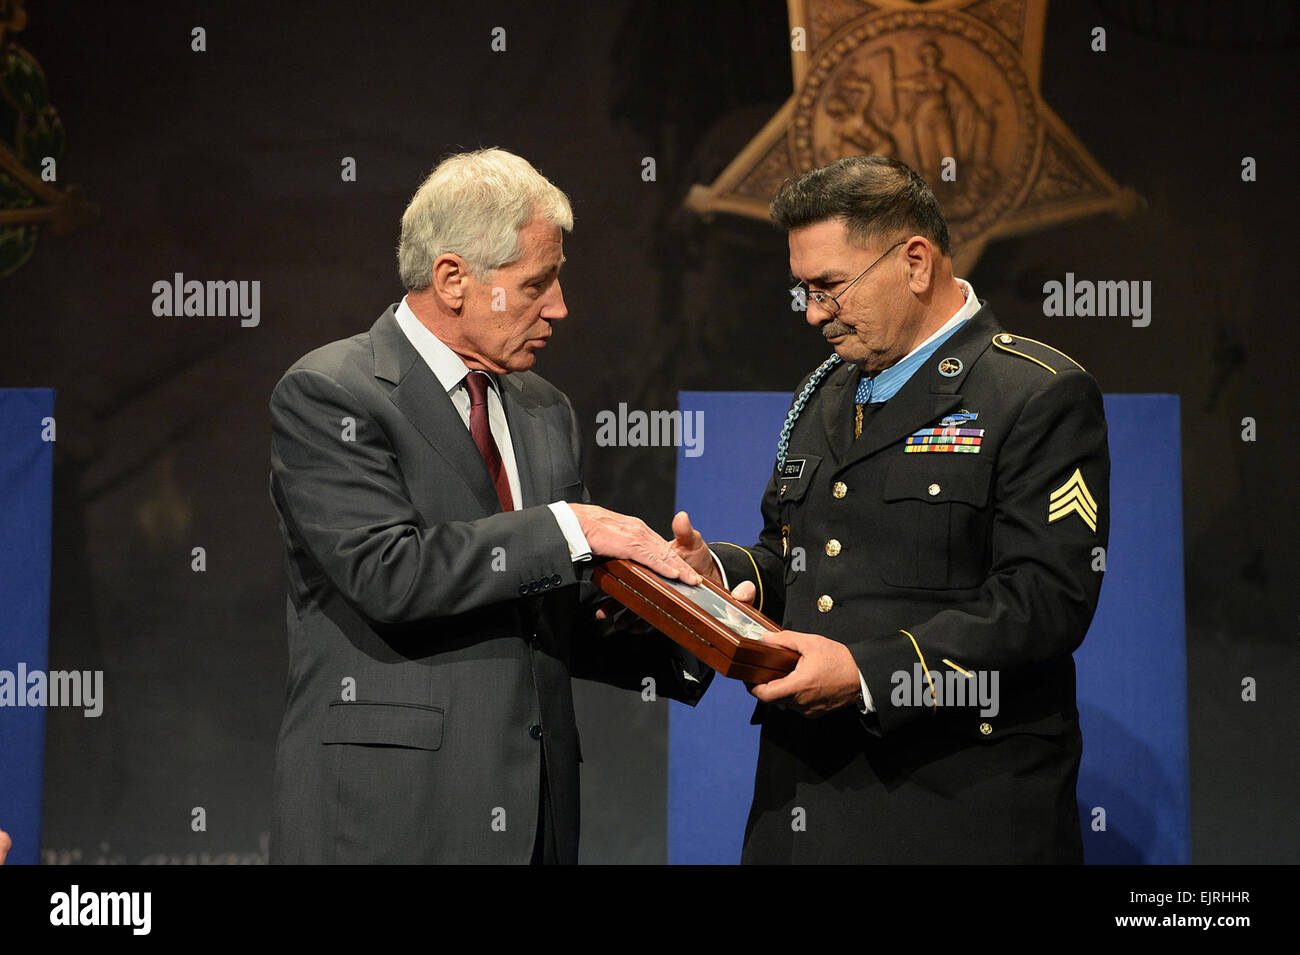 Spec. 4 Santiago J. Erevia is presented the Medal of Honor Flag by Secretary of Defense Chuck Hagel after being inducted into the Hall of Heroes during a ceremony at the Pentagon, Washington D.C., March 19, 2014. Erevia distinguished himself May 21, 1969, while serving as a radio-telephone operator during a search-and-clear mission near Tam Ky City, in the Republic of Vietnam.  Mr. Leroy Council Stock Photo